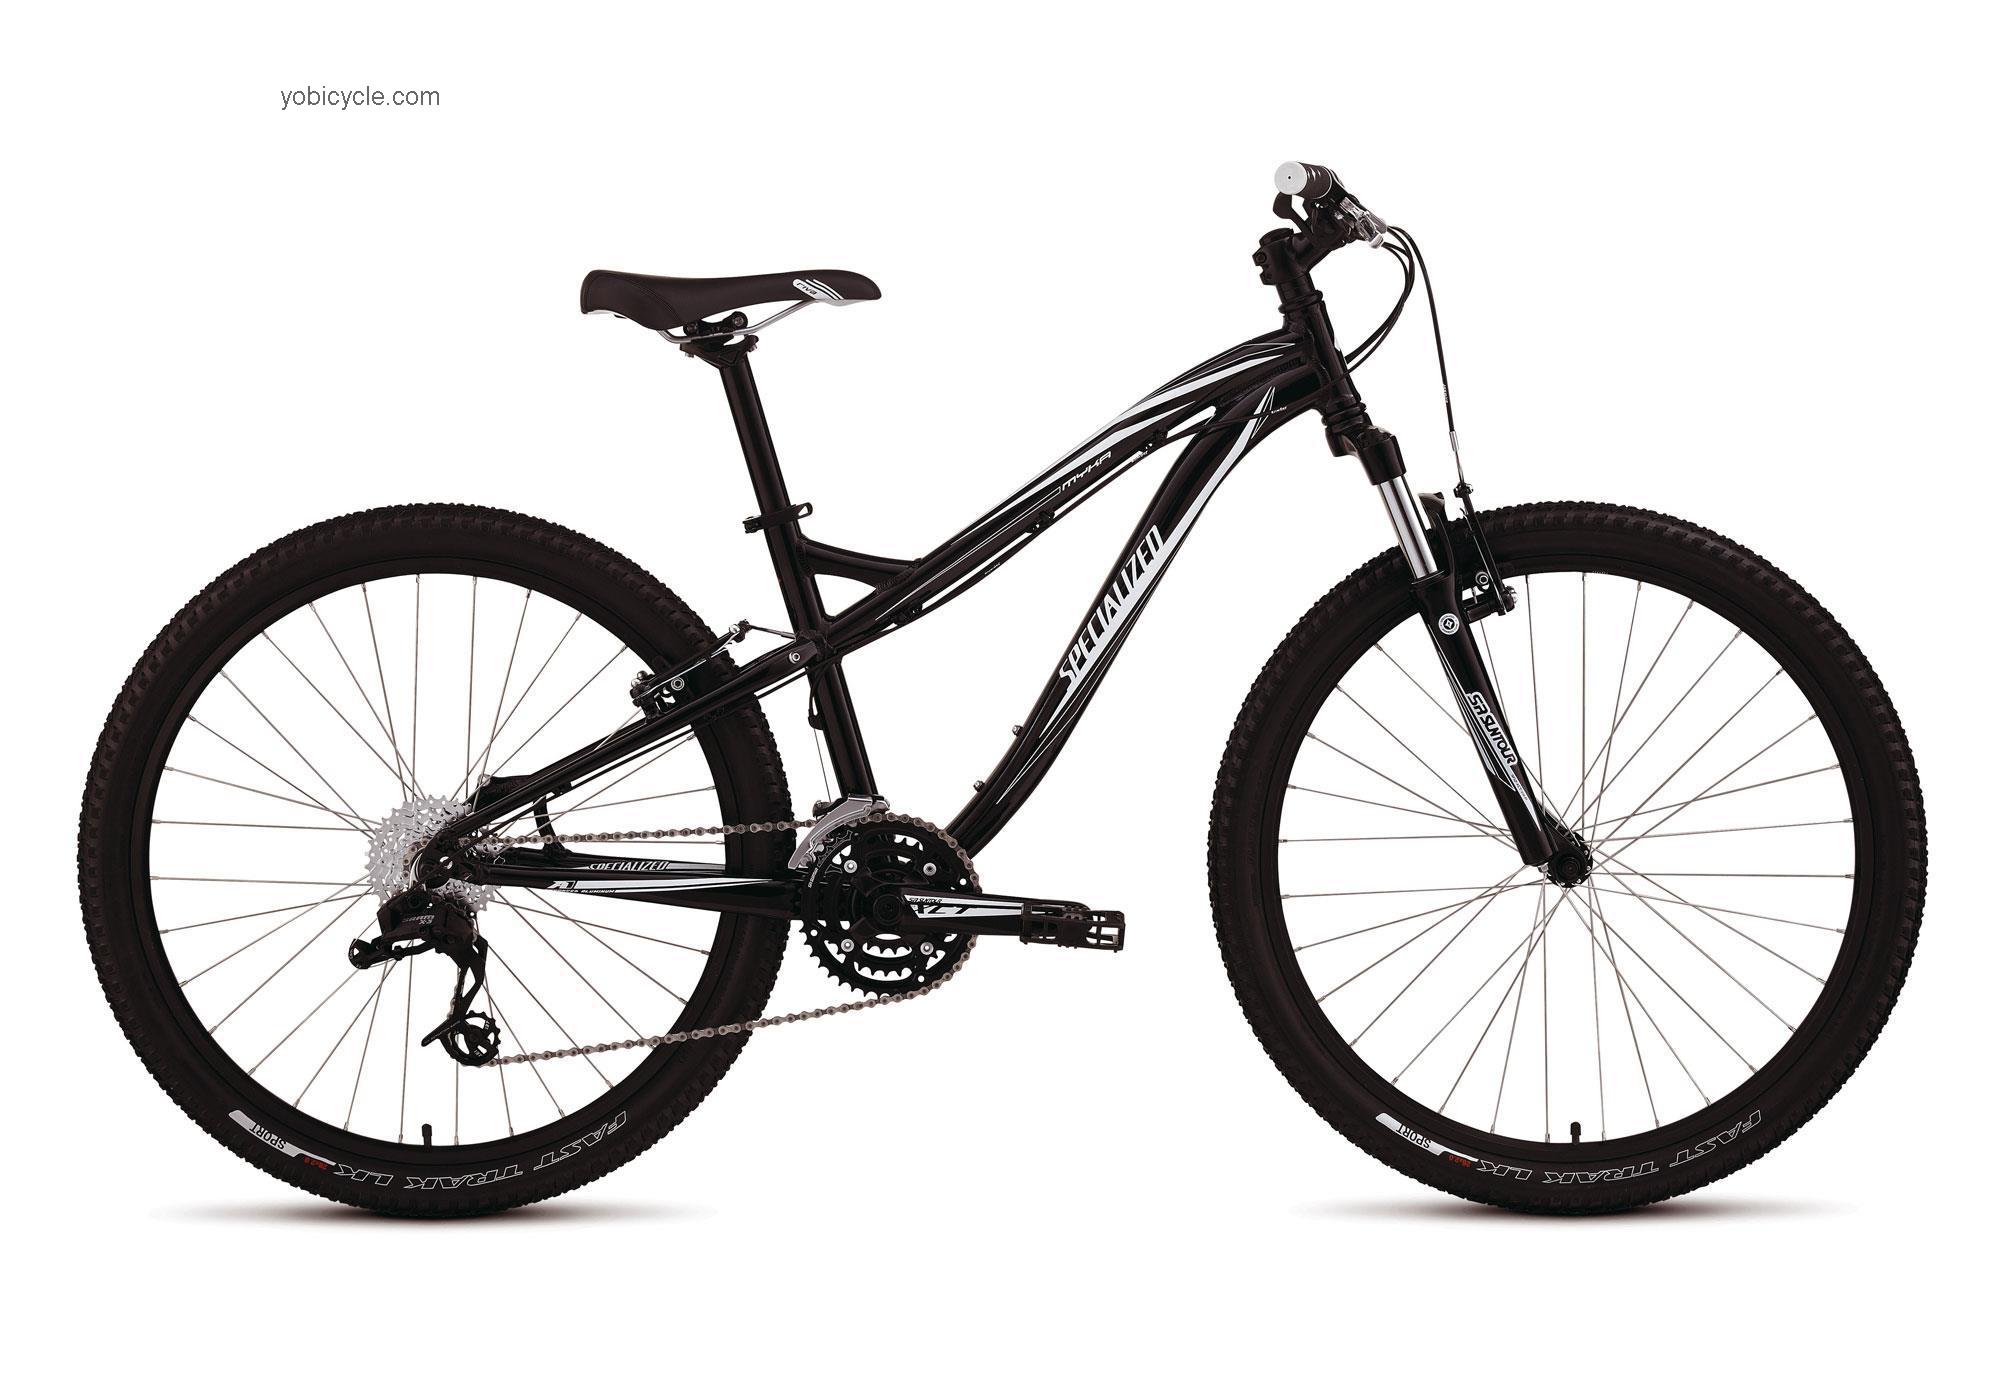 Specialized Myka HT 2012 comparison online with competitors